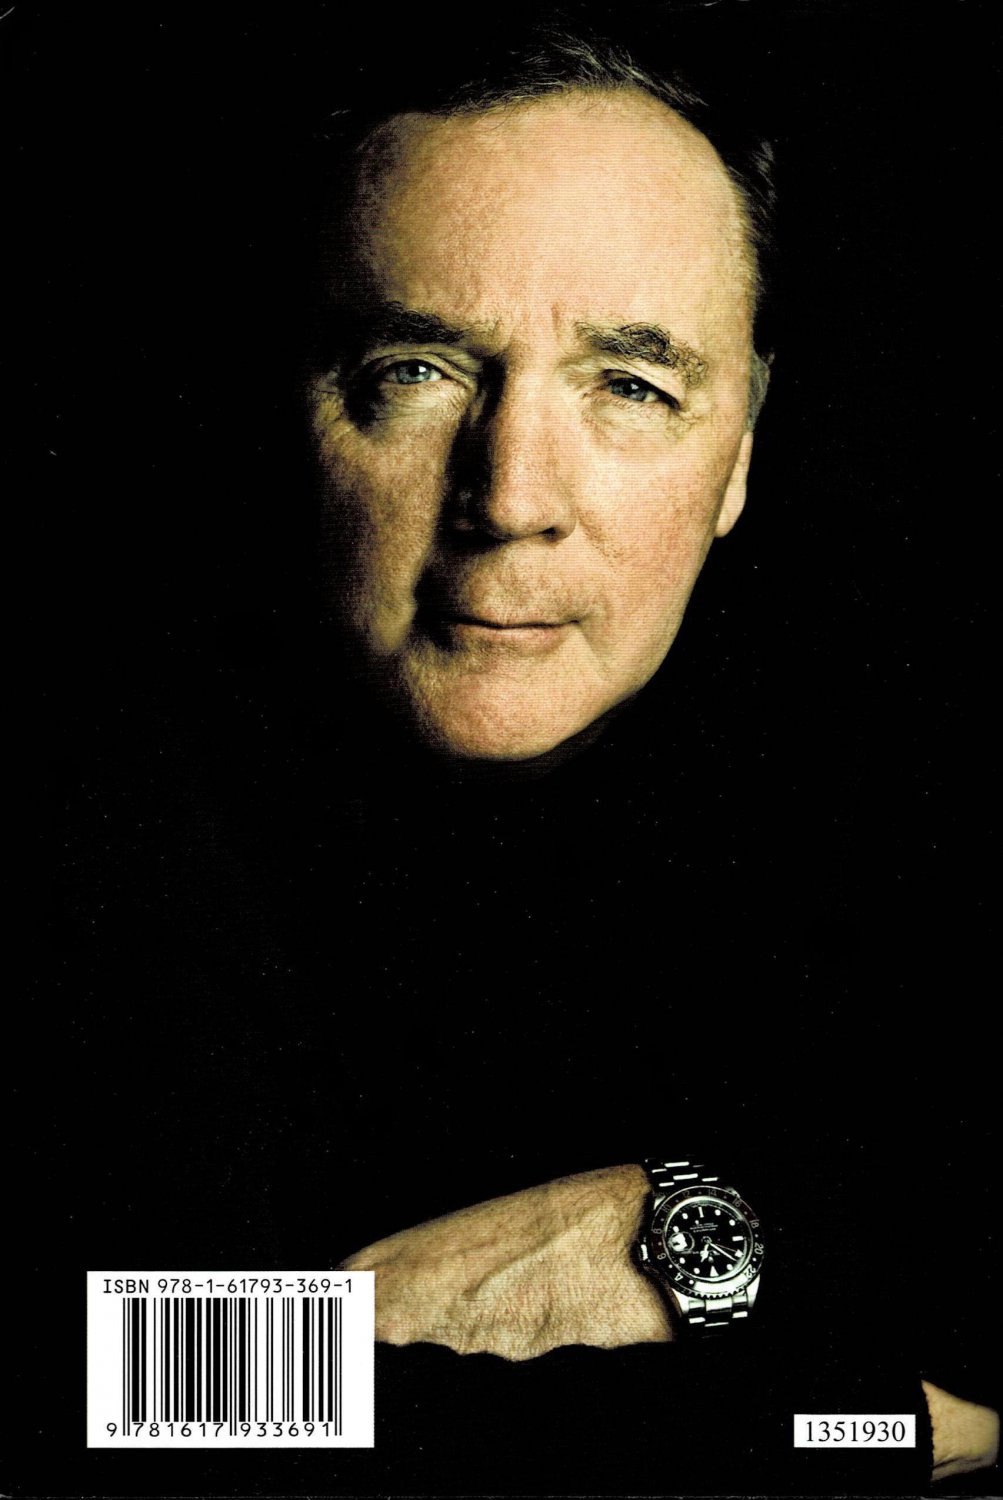 printable james patterson book list in order